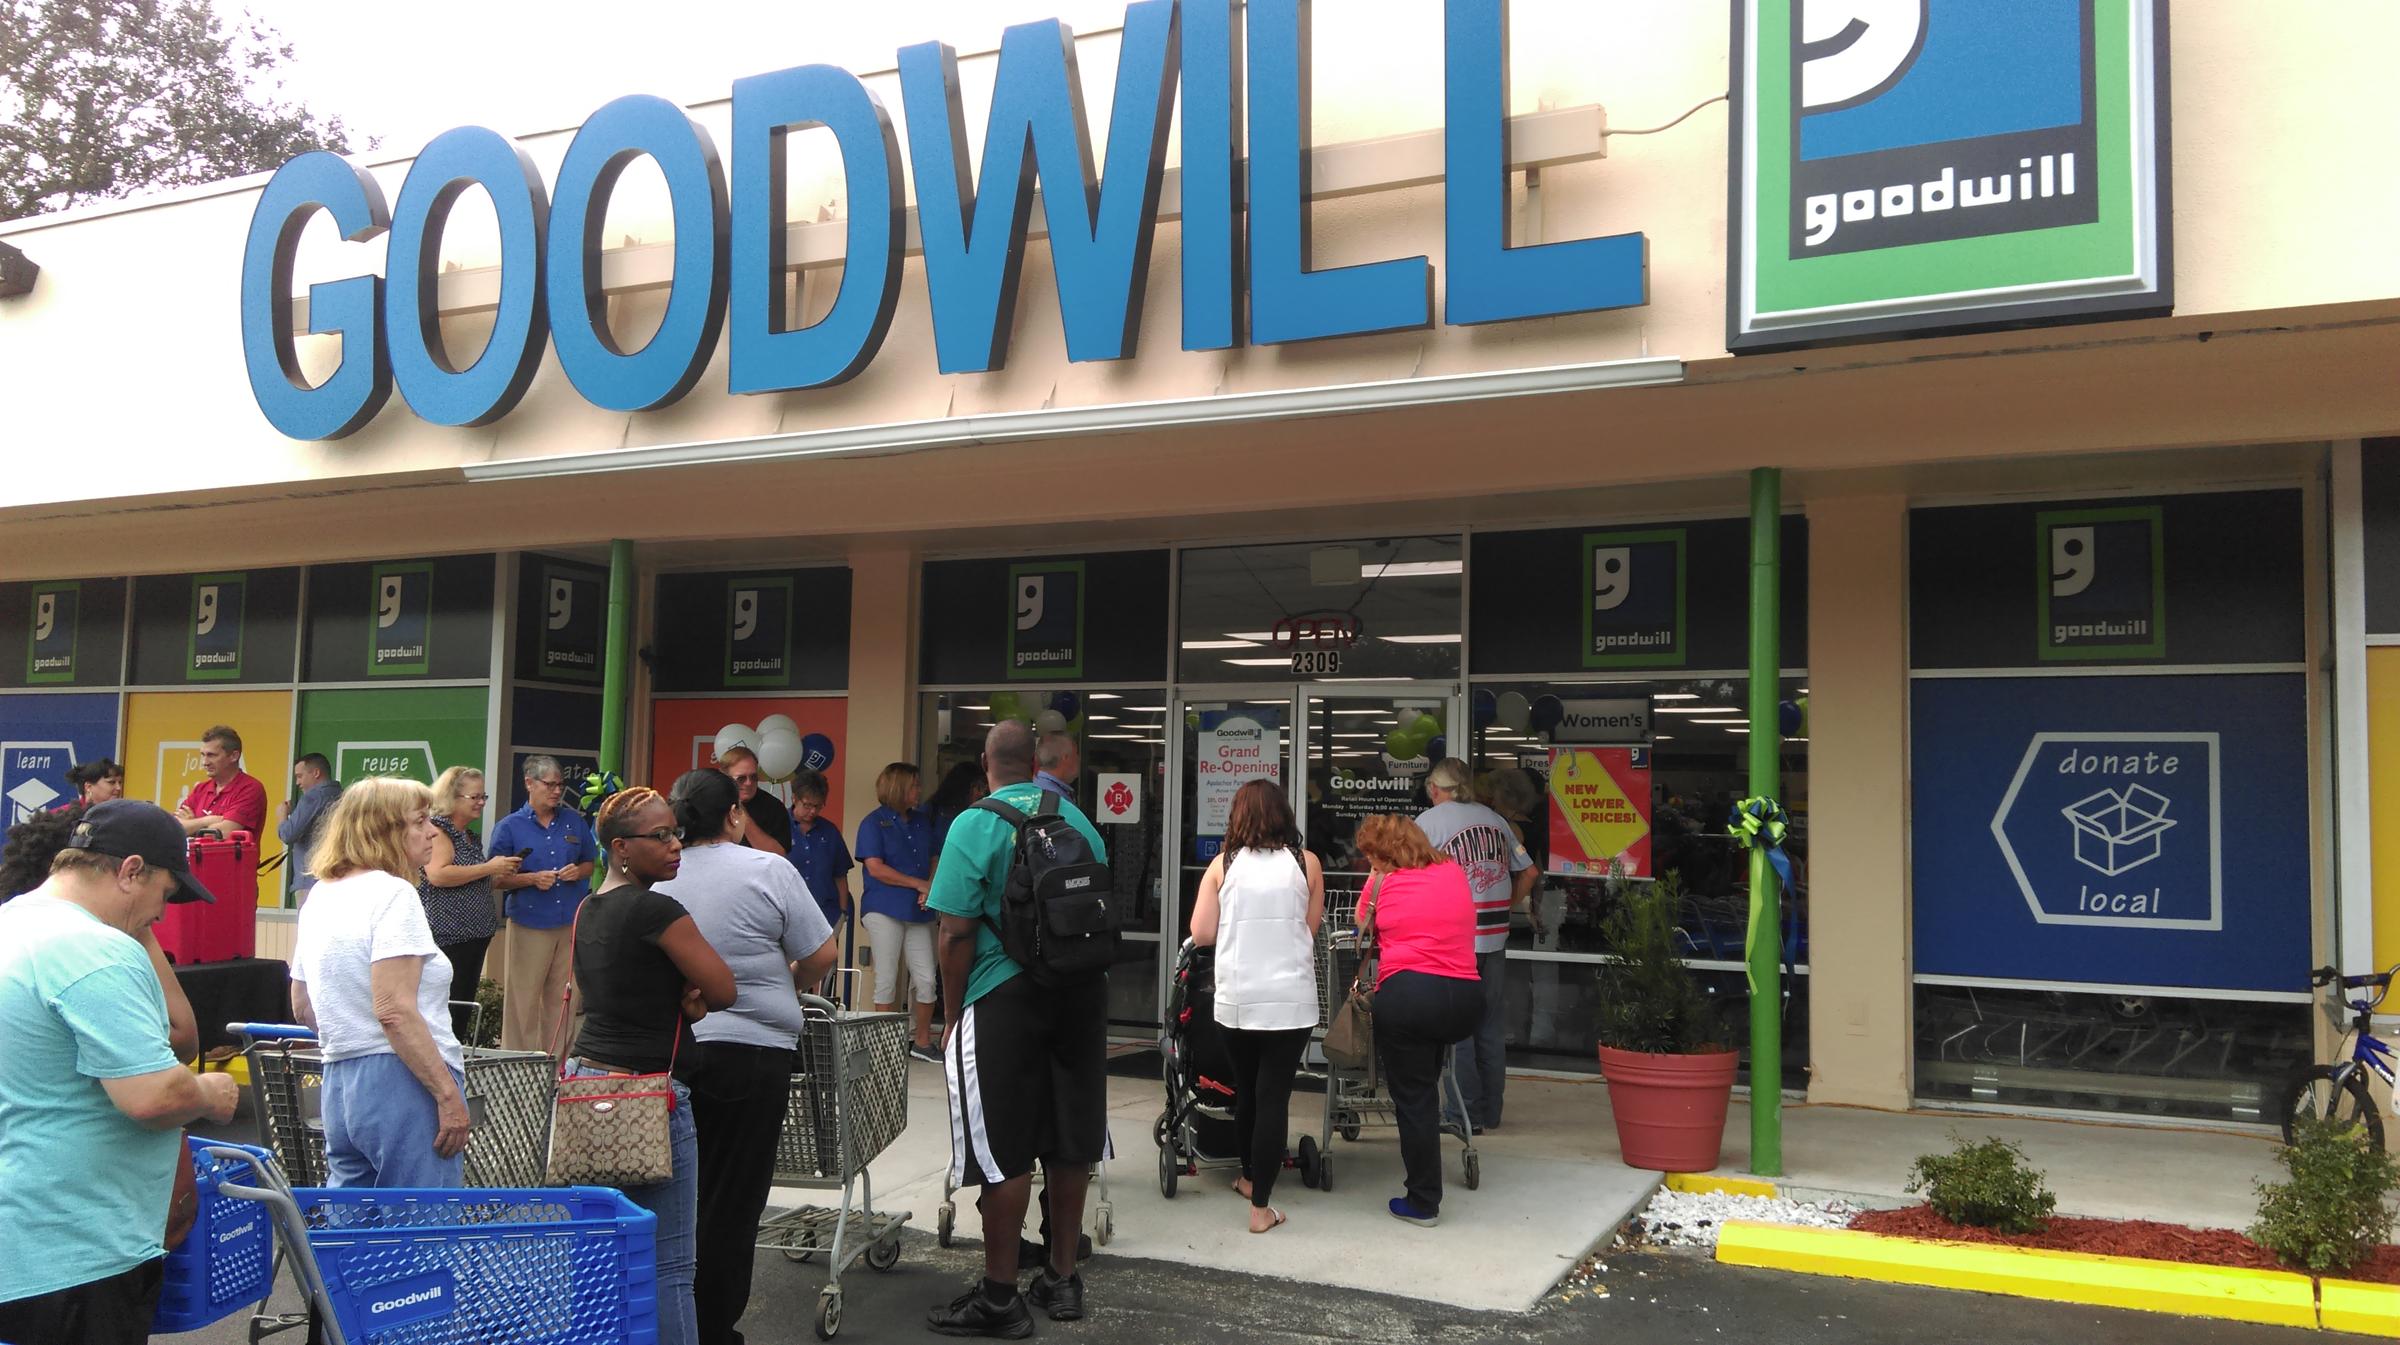 local-goodwill-stores-getting-facelifts-wfsu